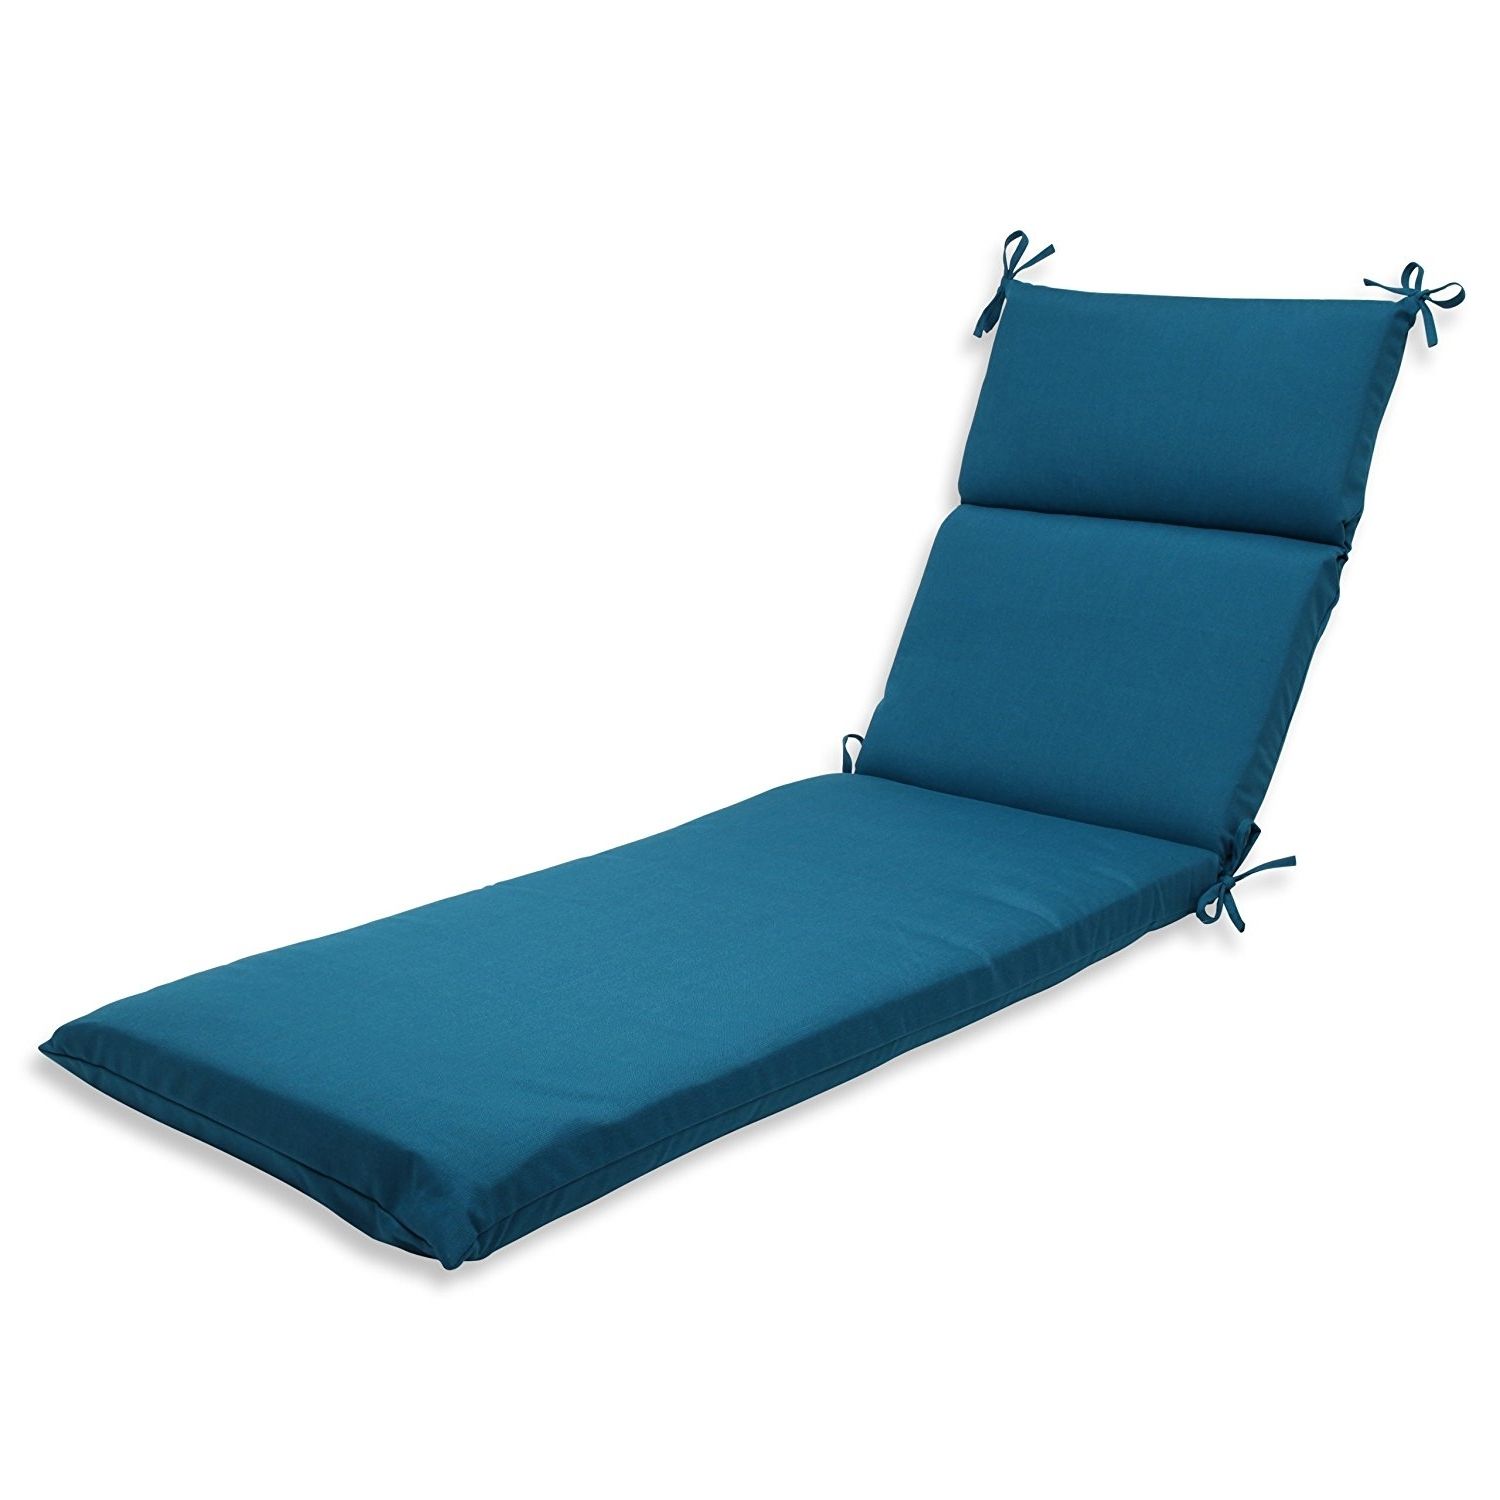 Best And Newest Amazon: Pillow Perfect Chaise Lounge Cushion With Sunbrella For Lakeport Outdoor Adjustable Chaise Lounge Chairs (View 13 of 15)